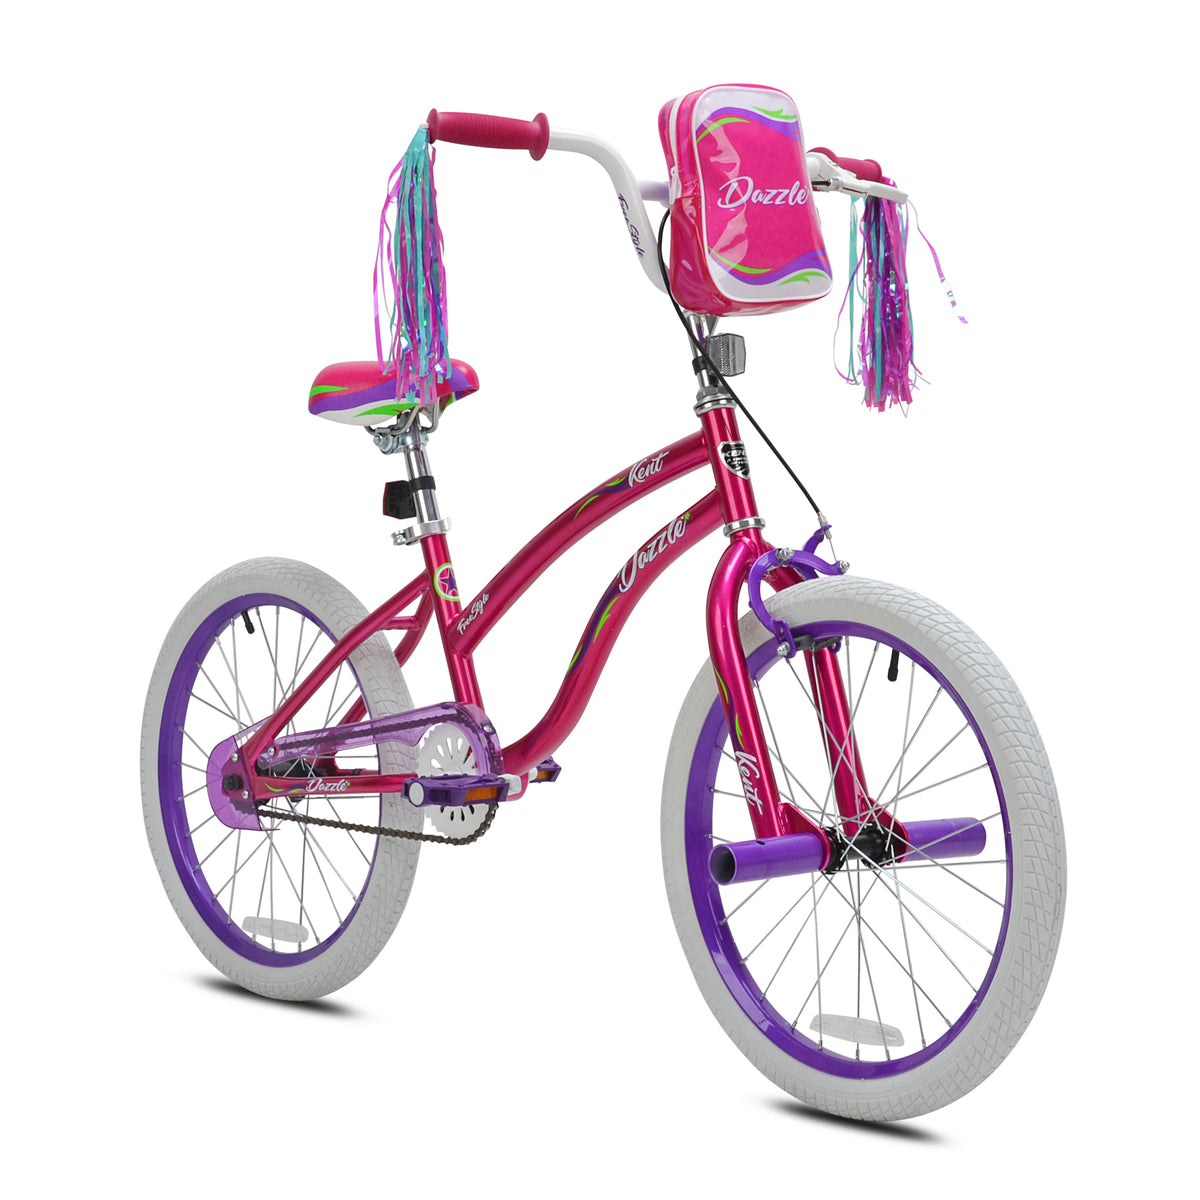 20" Kent Dazzle | Bike for Kids Ages 7-13